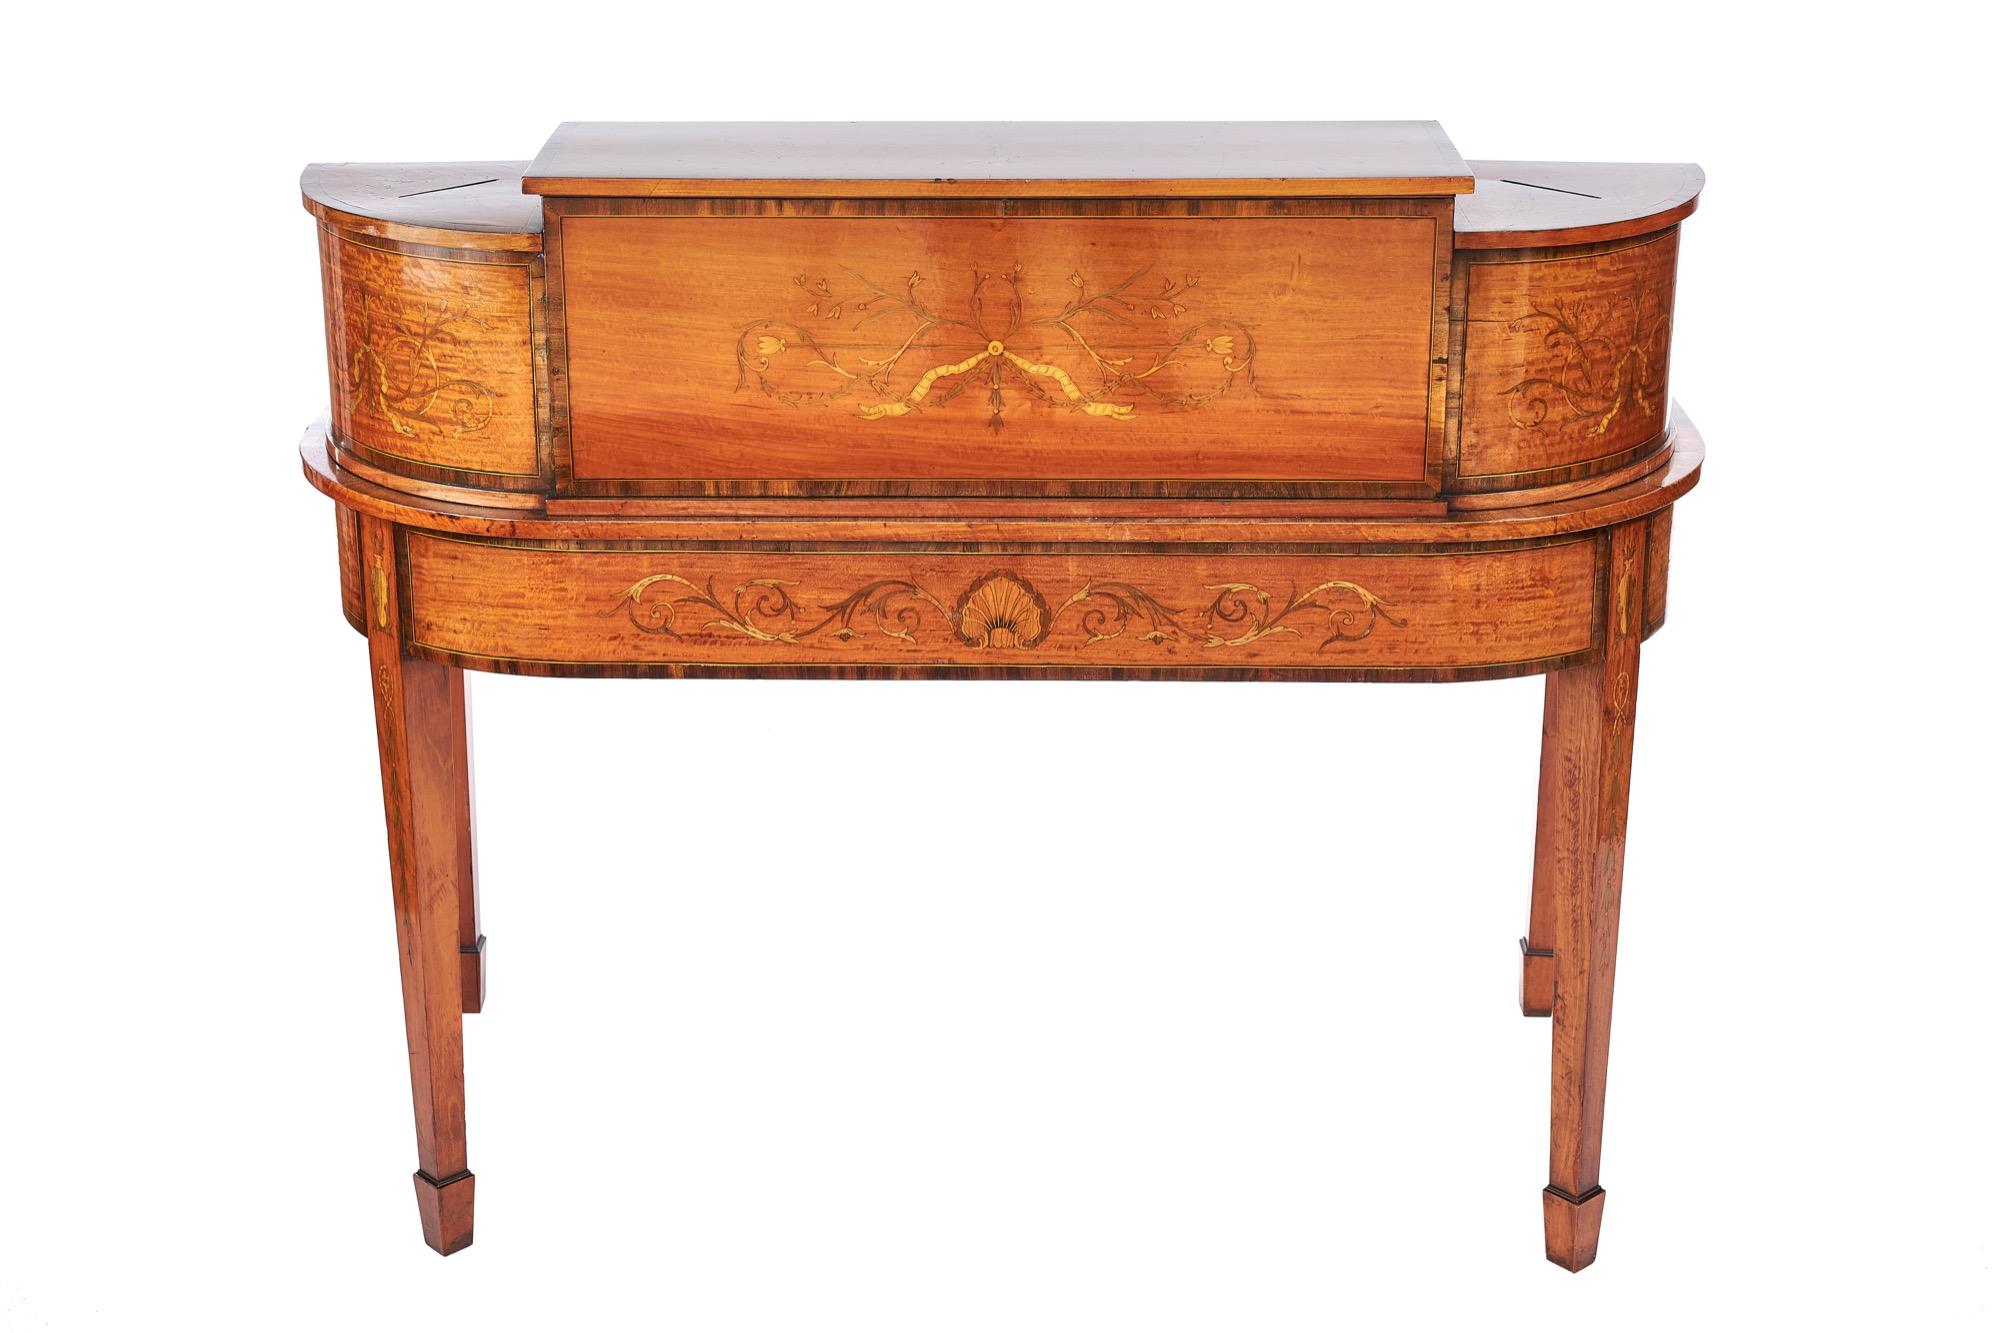 Fine Sheraton Revival Satinwood Inlaid Carlton House Desk. with Letter Boxes, Ci In Good Condition For Sale In Dereham, GB